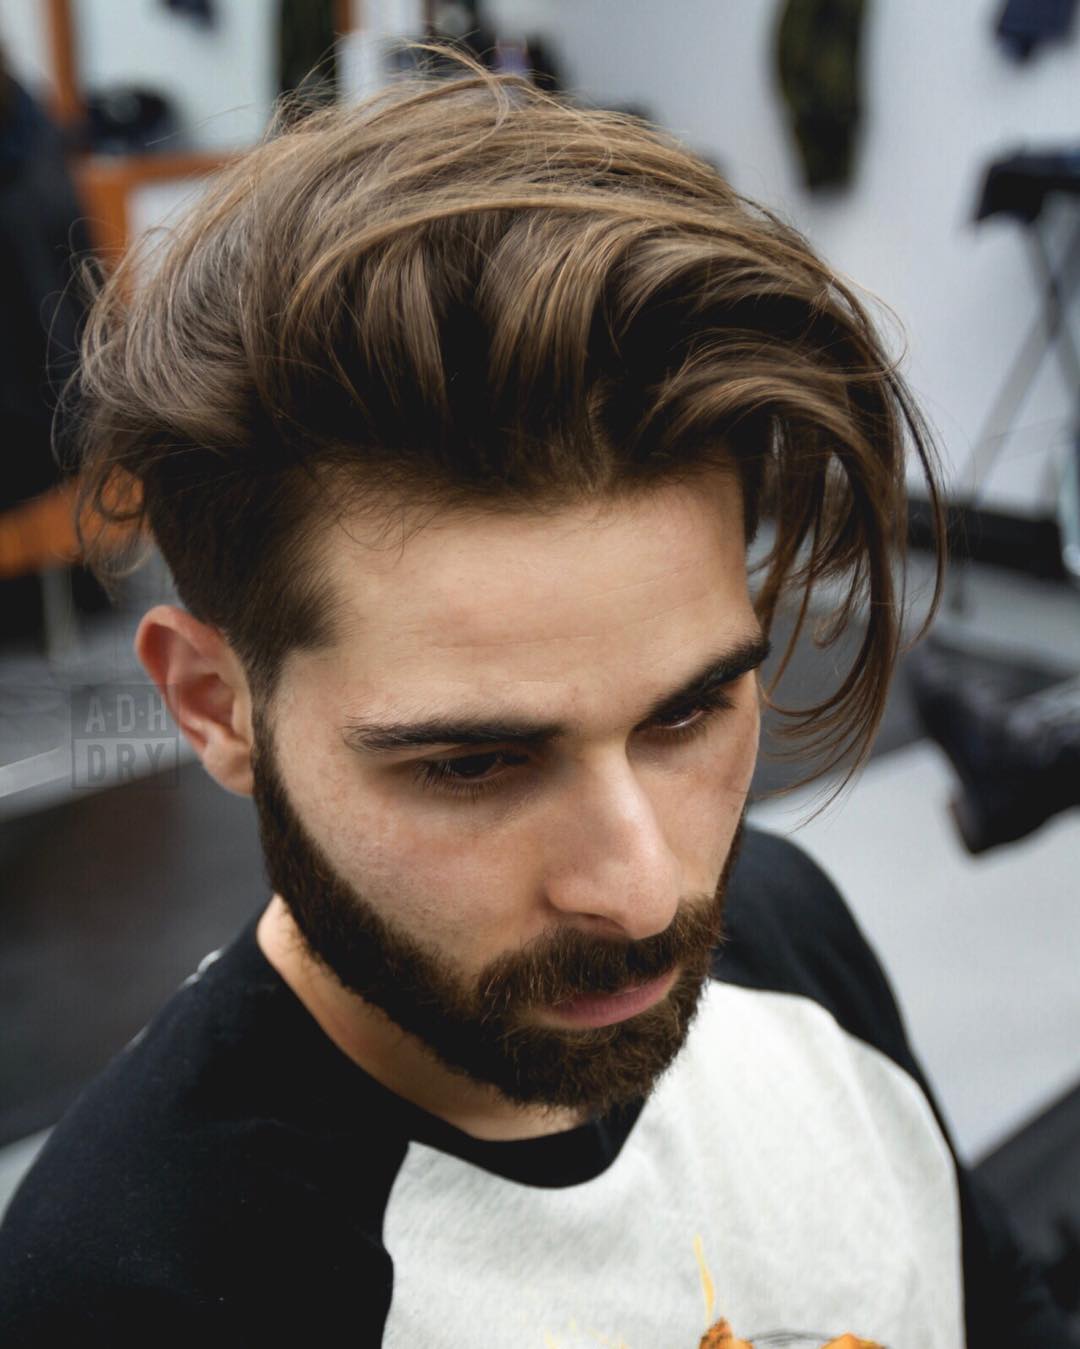 How To Grow Your Hair Out (Men's Tutorial)